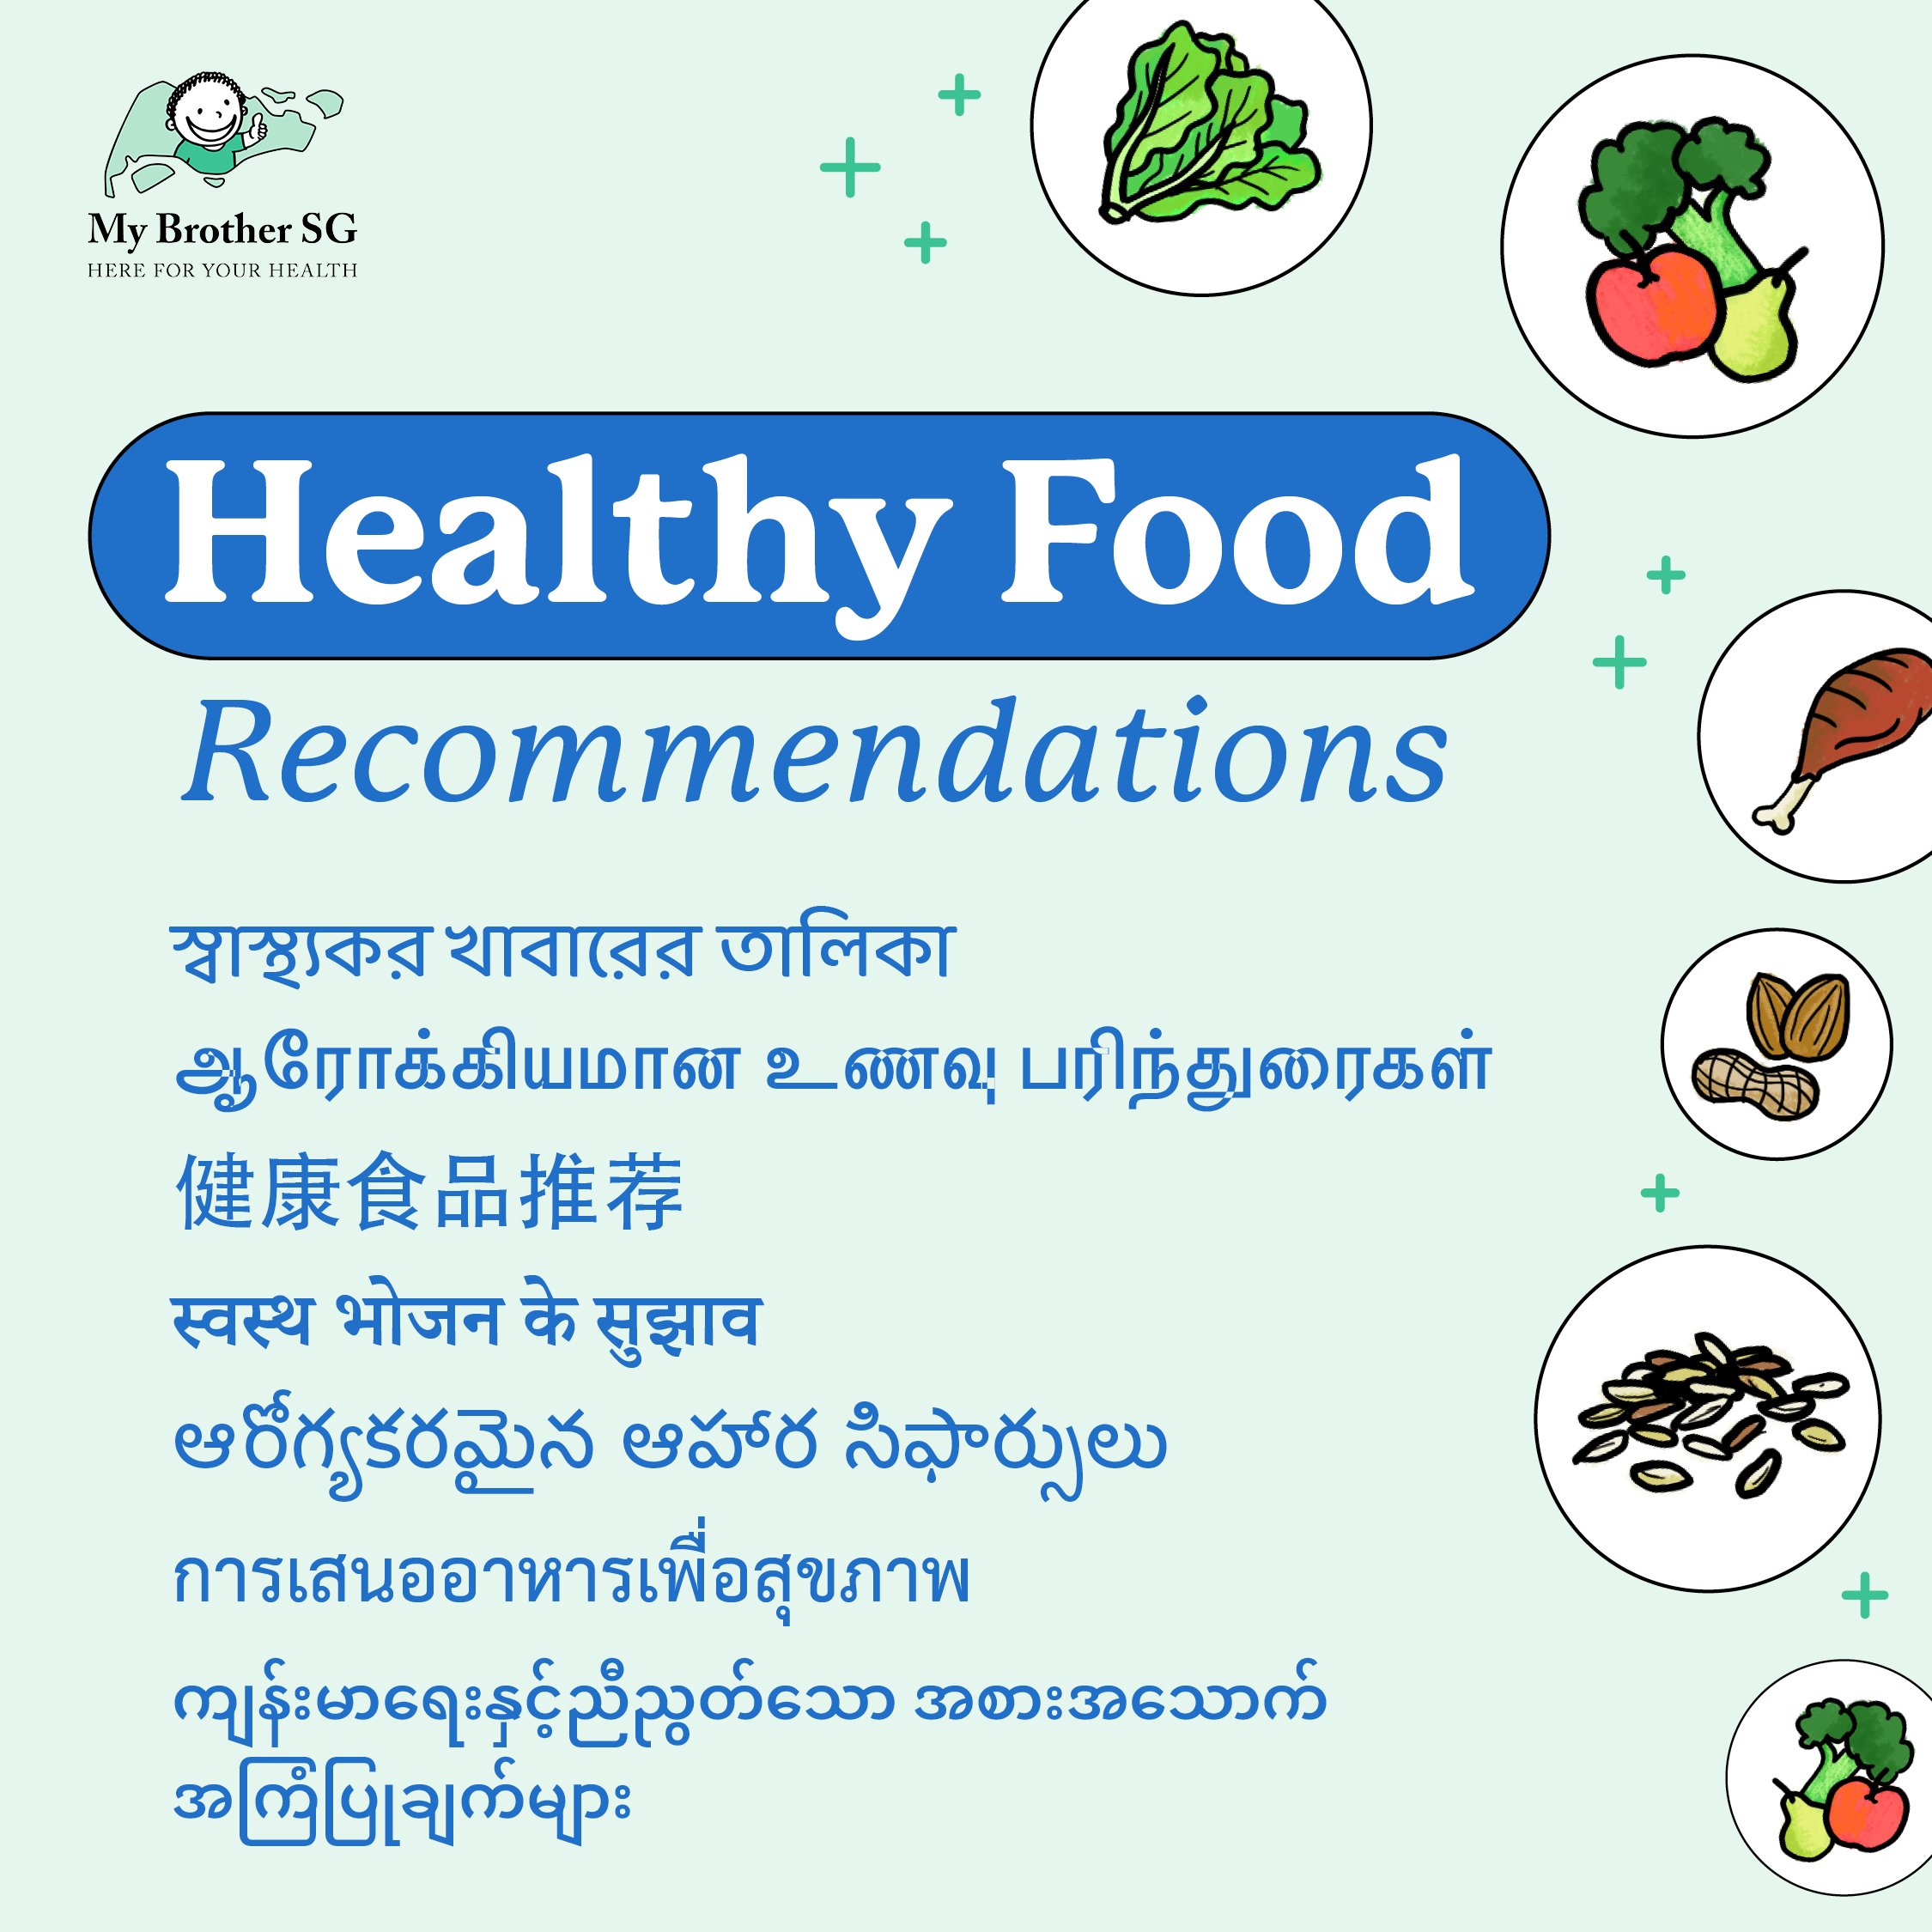 Healthy Food Recommendations.jpg